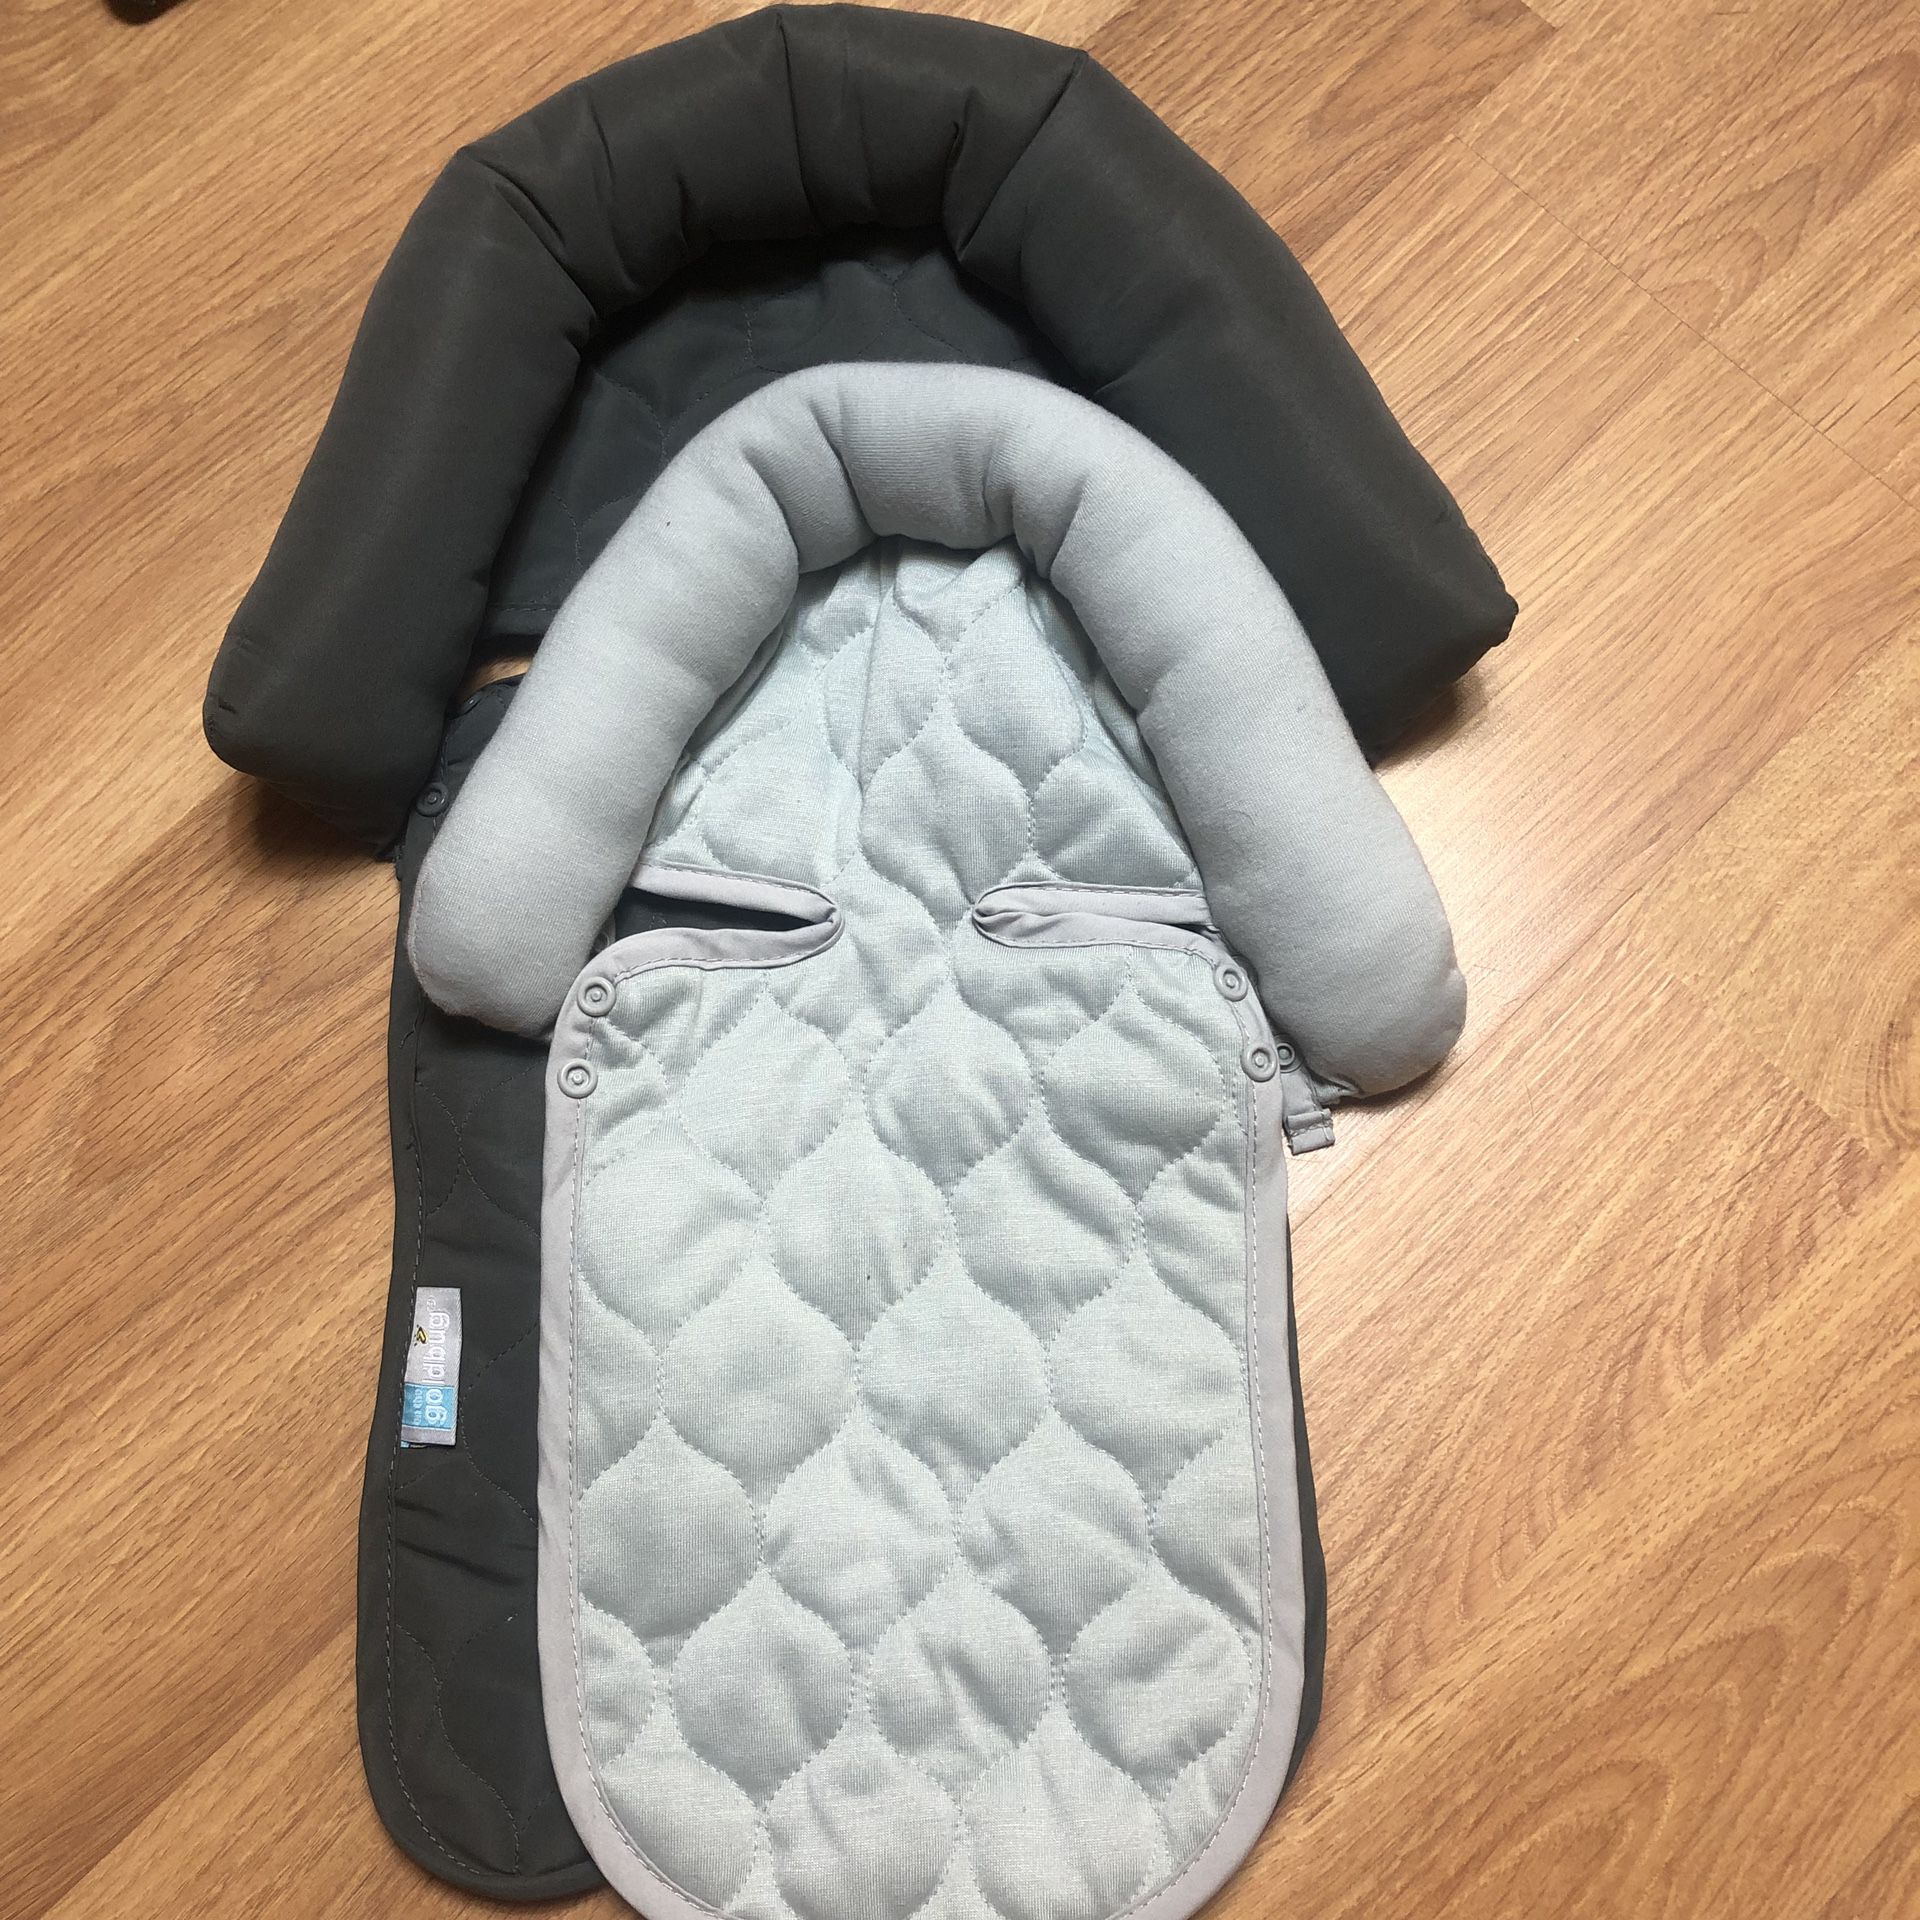 New for car seat